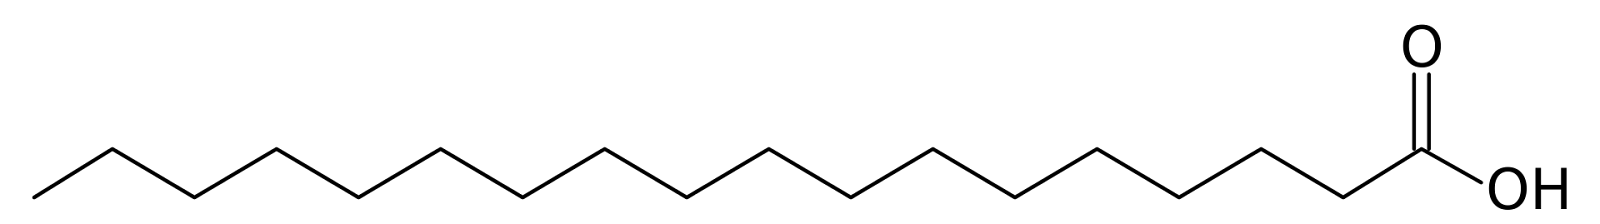 Chemical structure of Stearic Acid